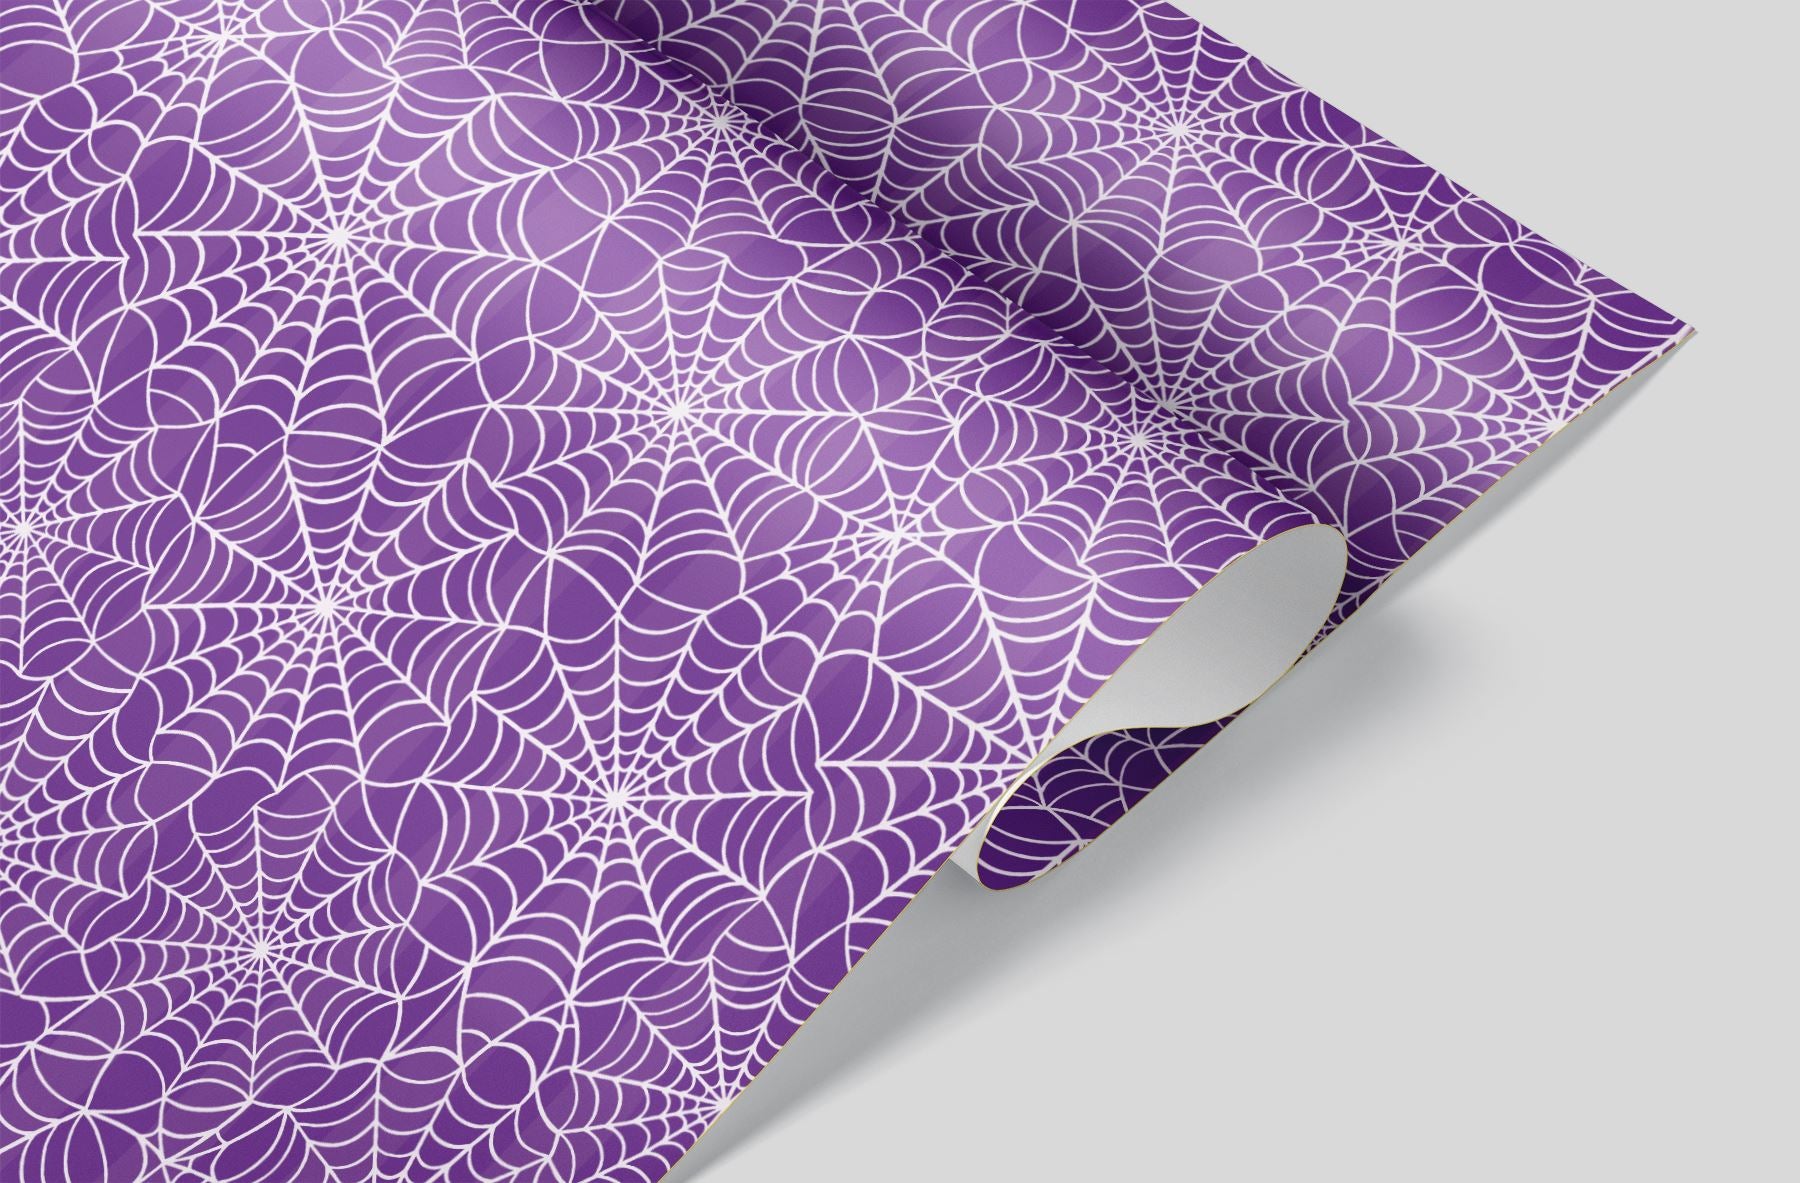 Giant Spider Webs on Purple Wrapping Paper Alexander's 